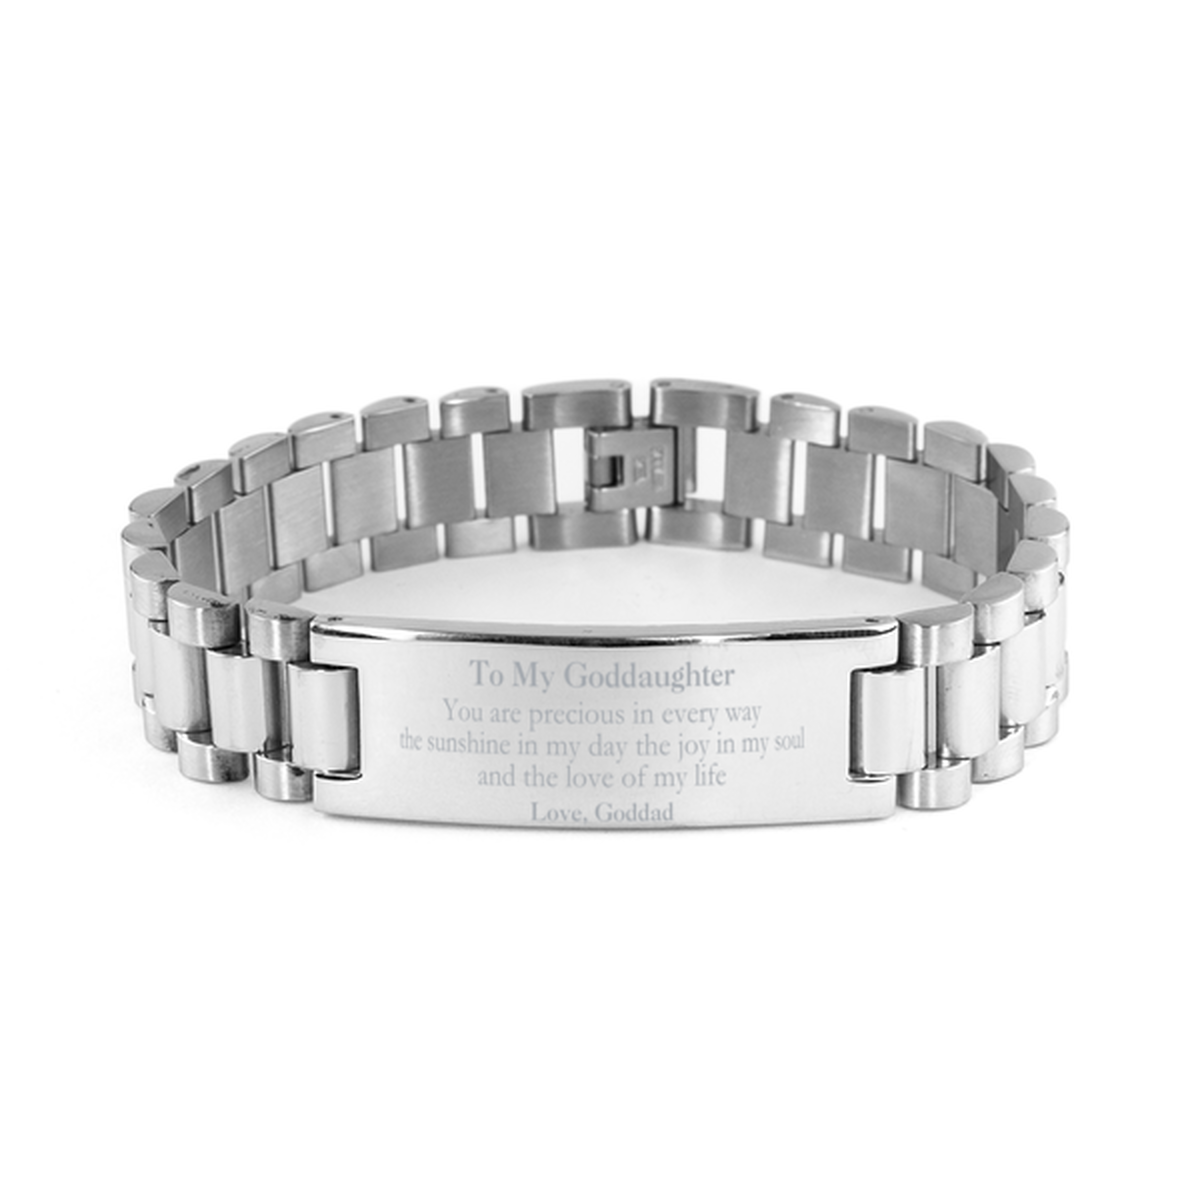 Graduation Gifts for Goddaughter Ladder Stainless Steel Bracelet Present from Goddad, Christmas Goddaughter Birthday Gifts Goddaughter You are precious in every way the sunshine in my day. Love, Goddad